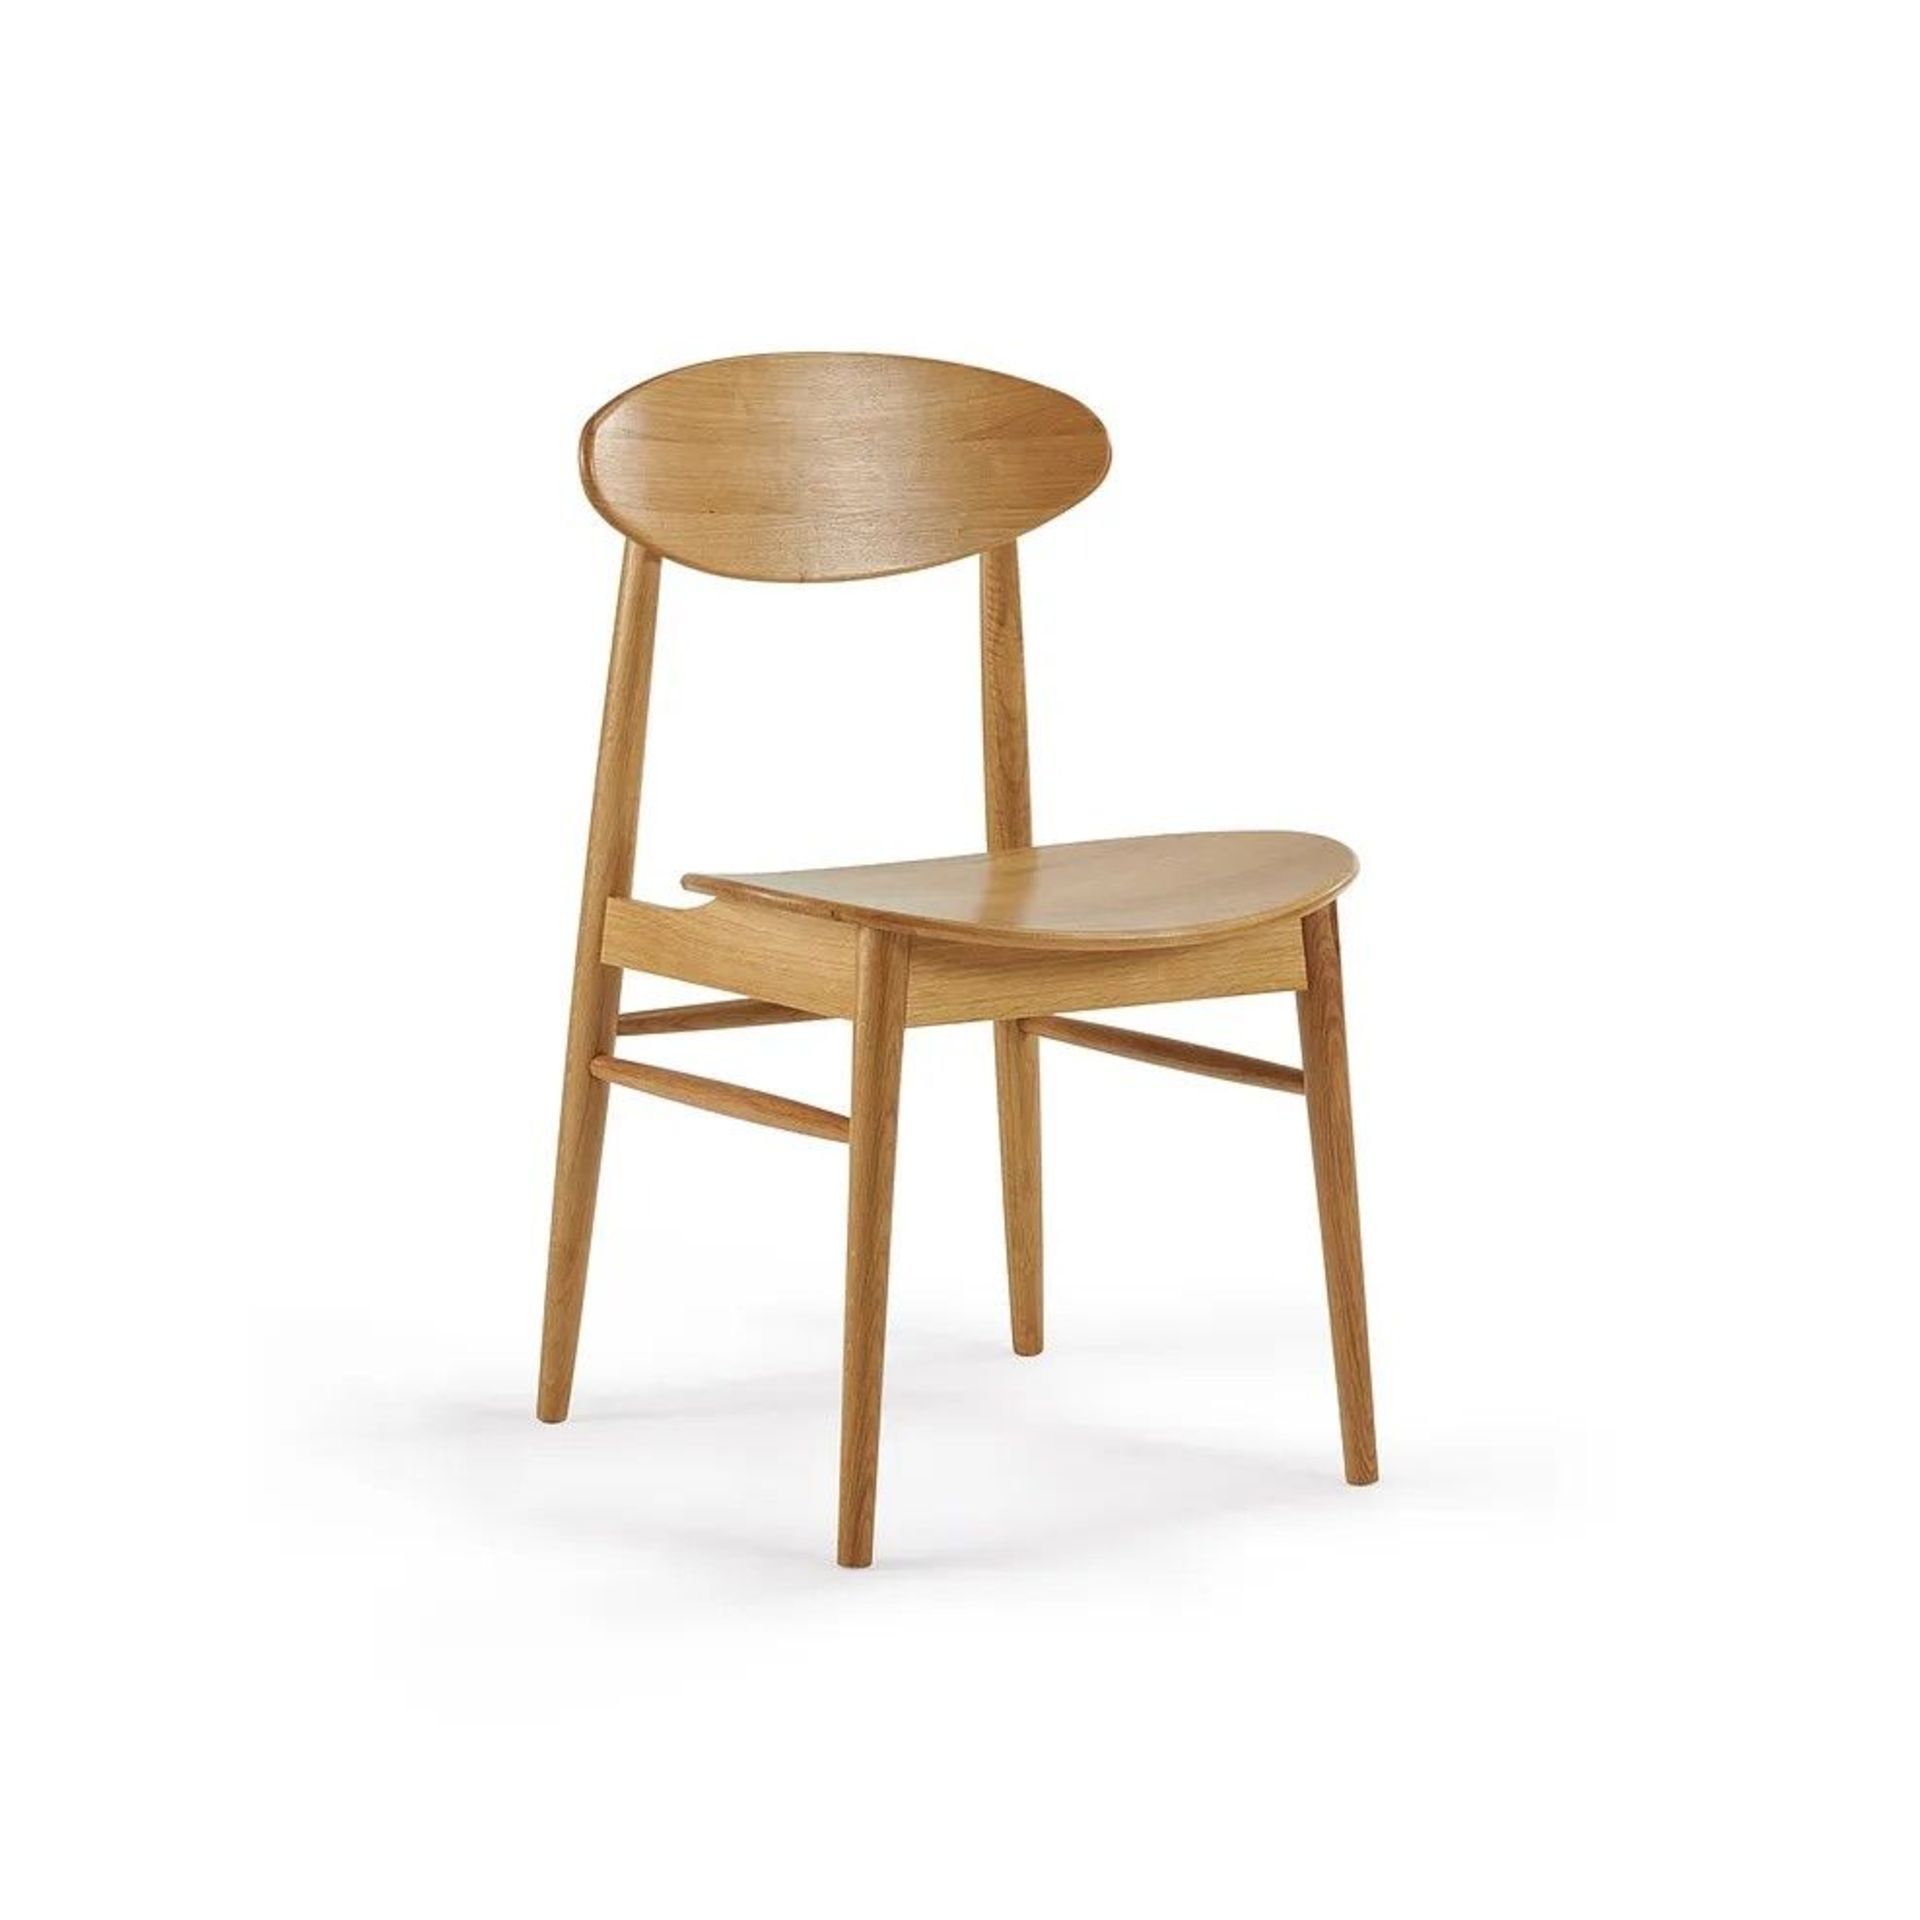 24 X NEW BOXED OSCAR SOLID OAK DINING CHAIRS. SET RRP £3,840. With its contemporary, yet versatile